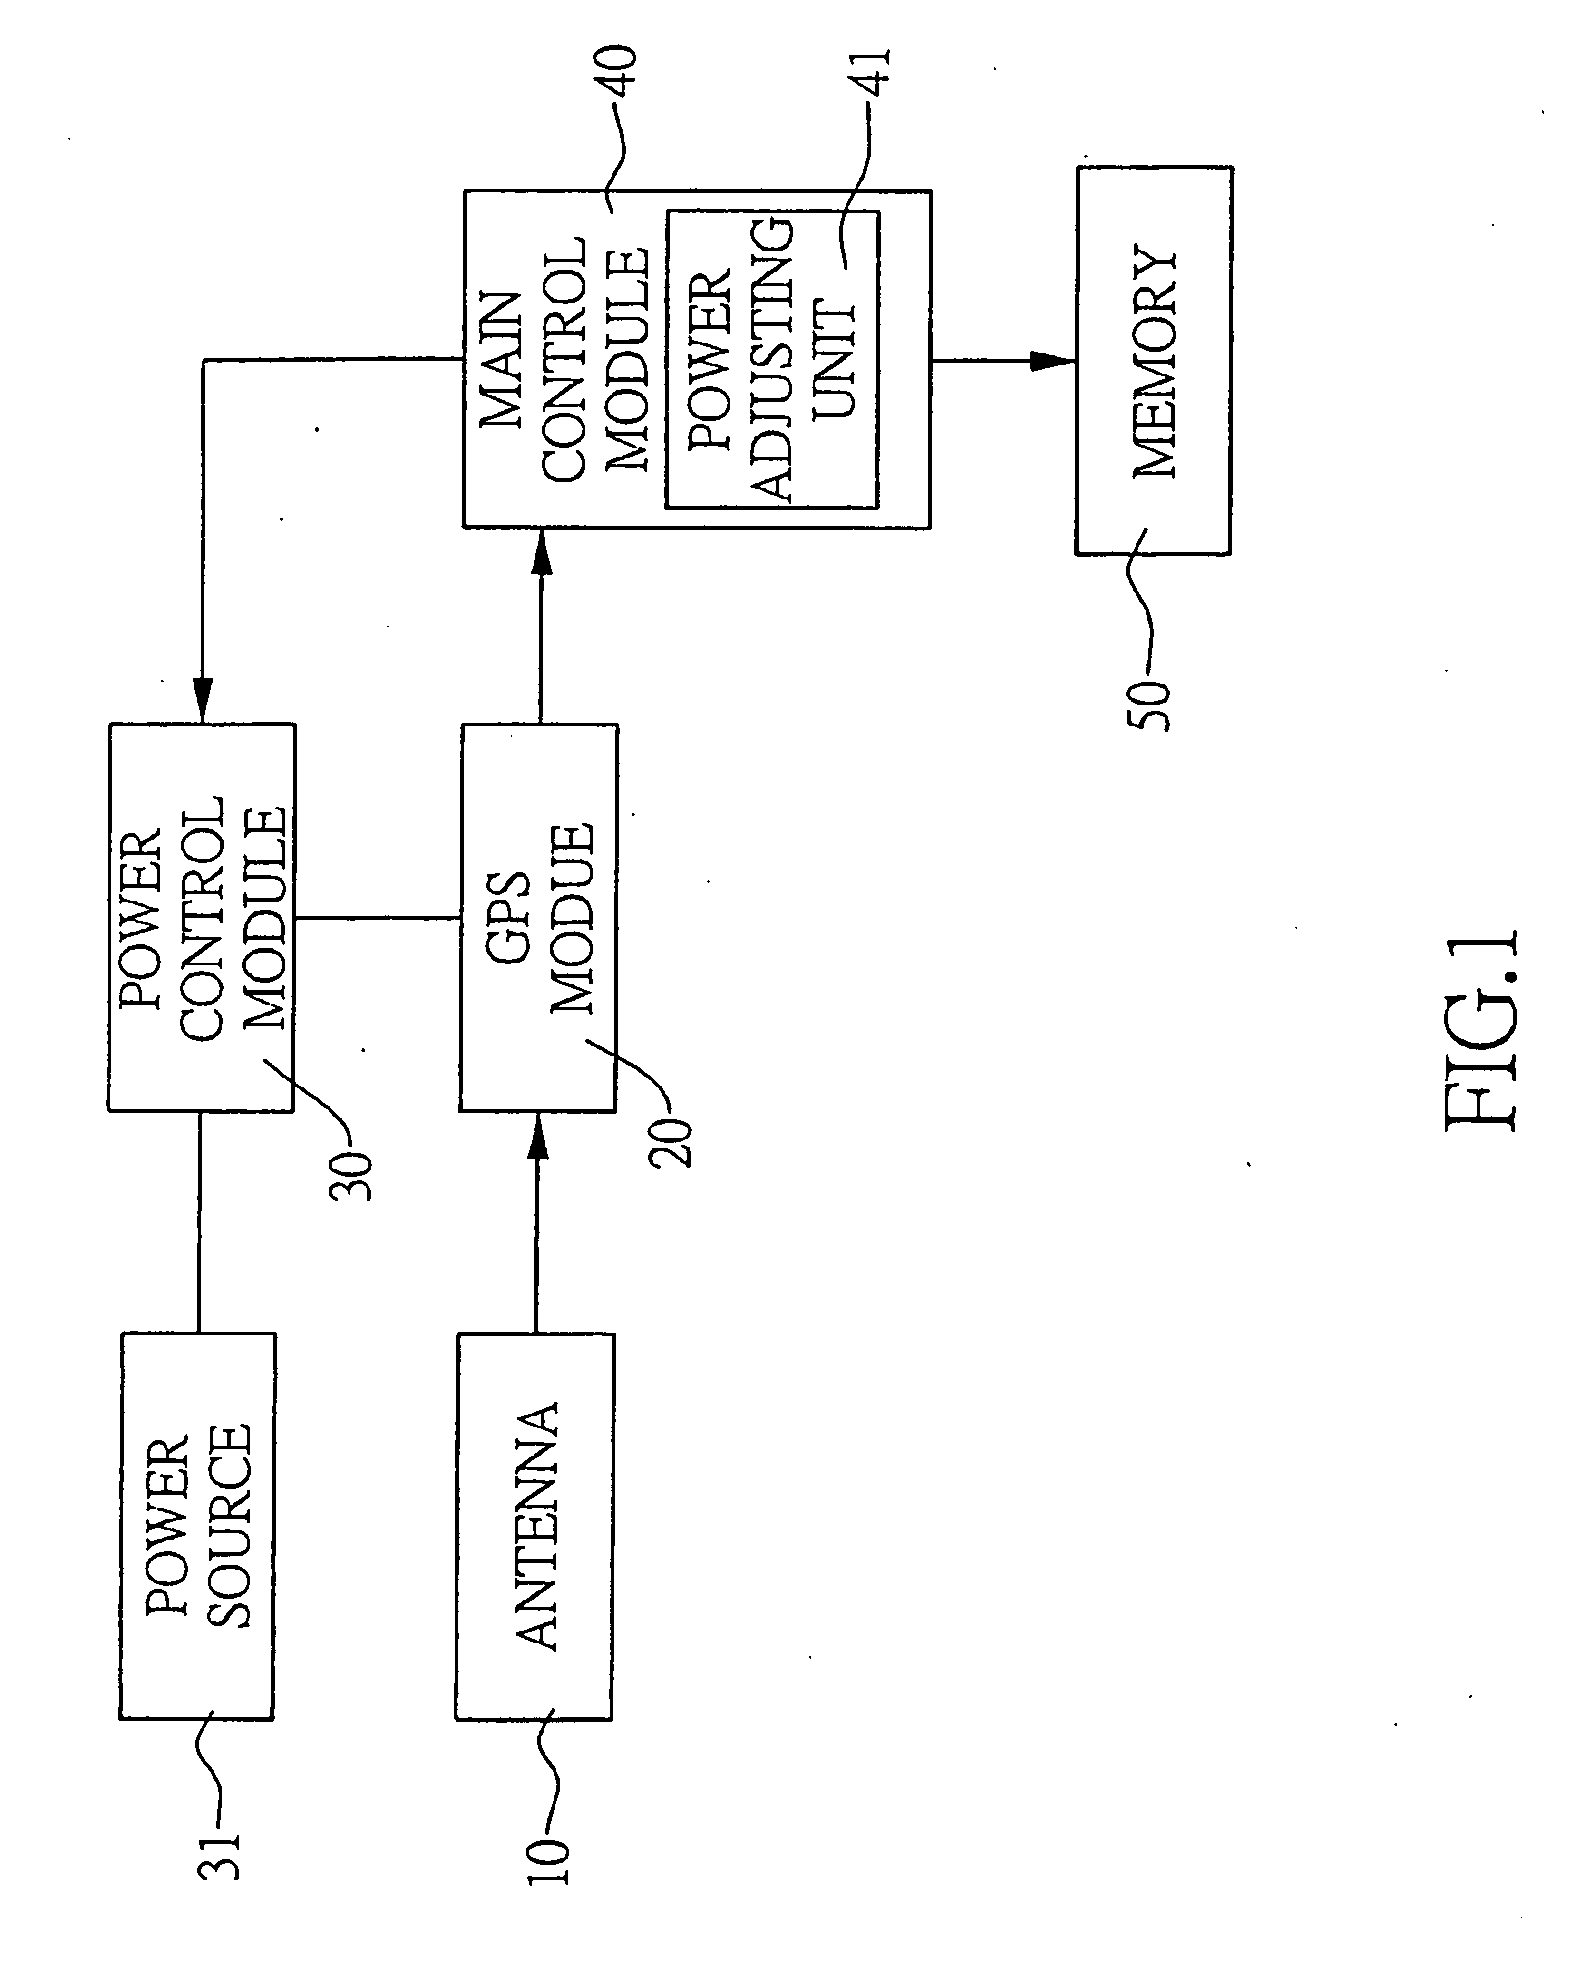 Global positioning system log with low power consumption